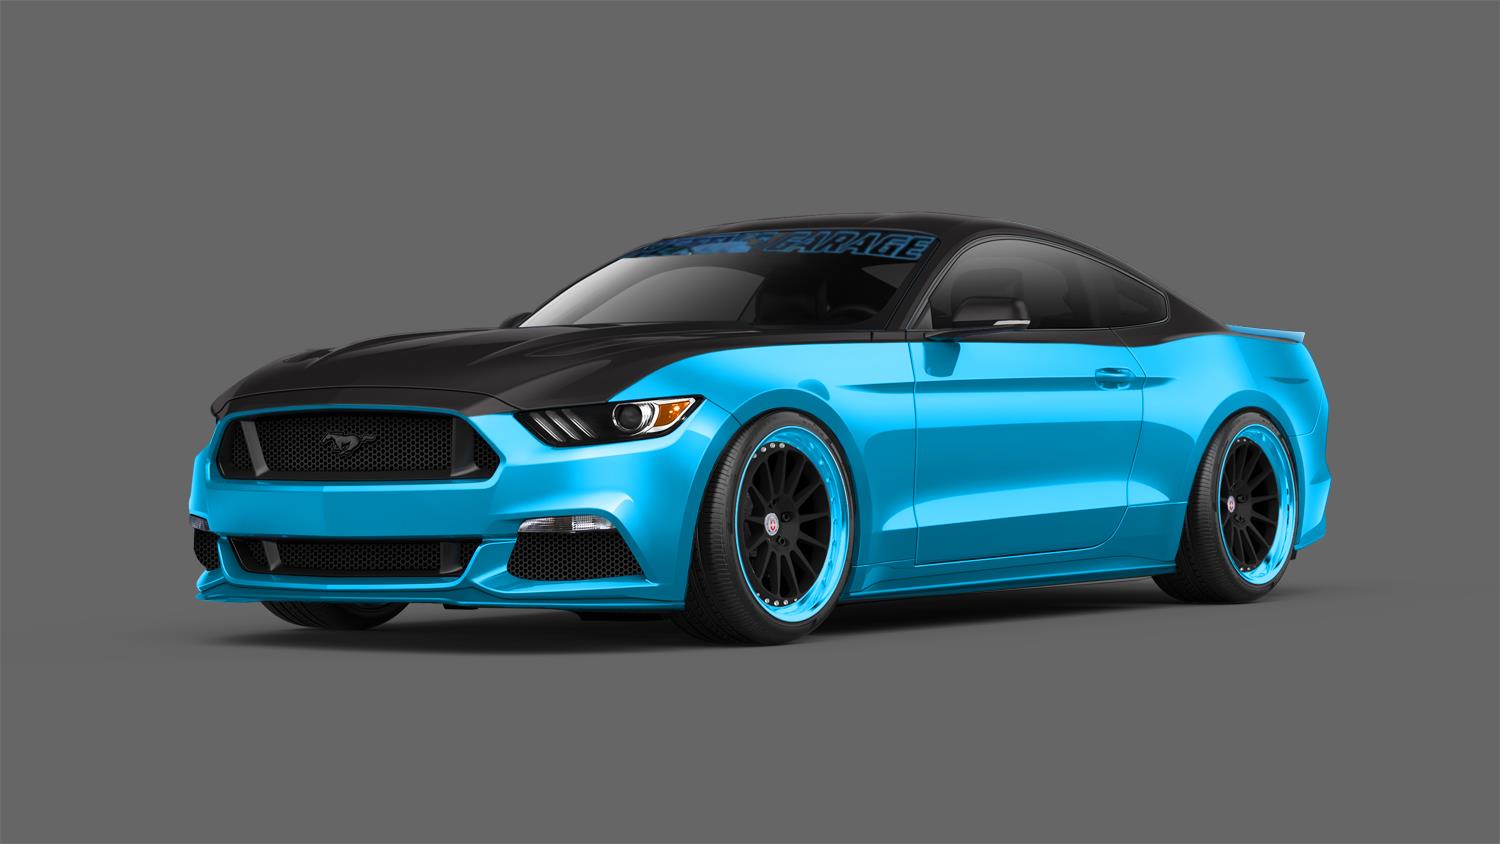 STAMPEDE OF CUSTOMIZED 2015 FORD MUSTANGS TO DEBUT AT 2014 SEMA SHOW IN LAS VEGAS